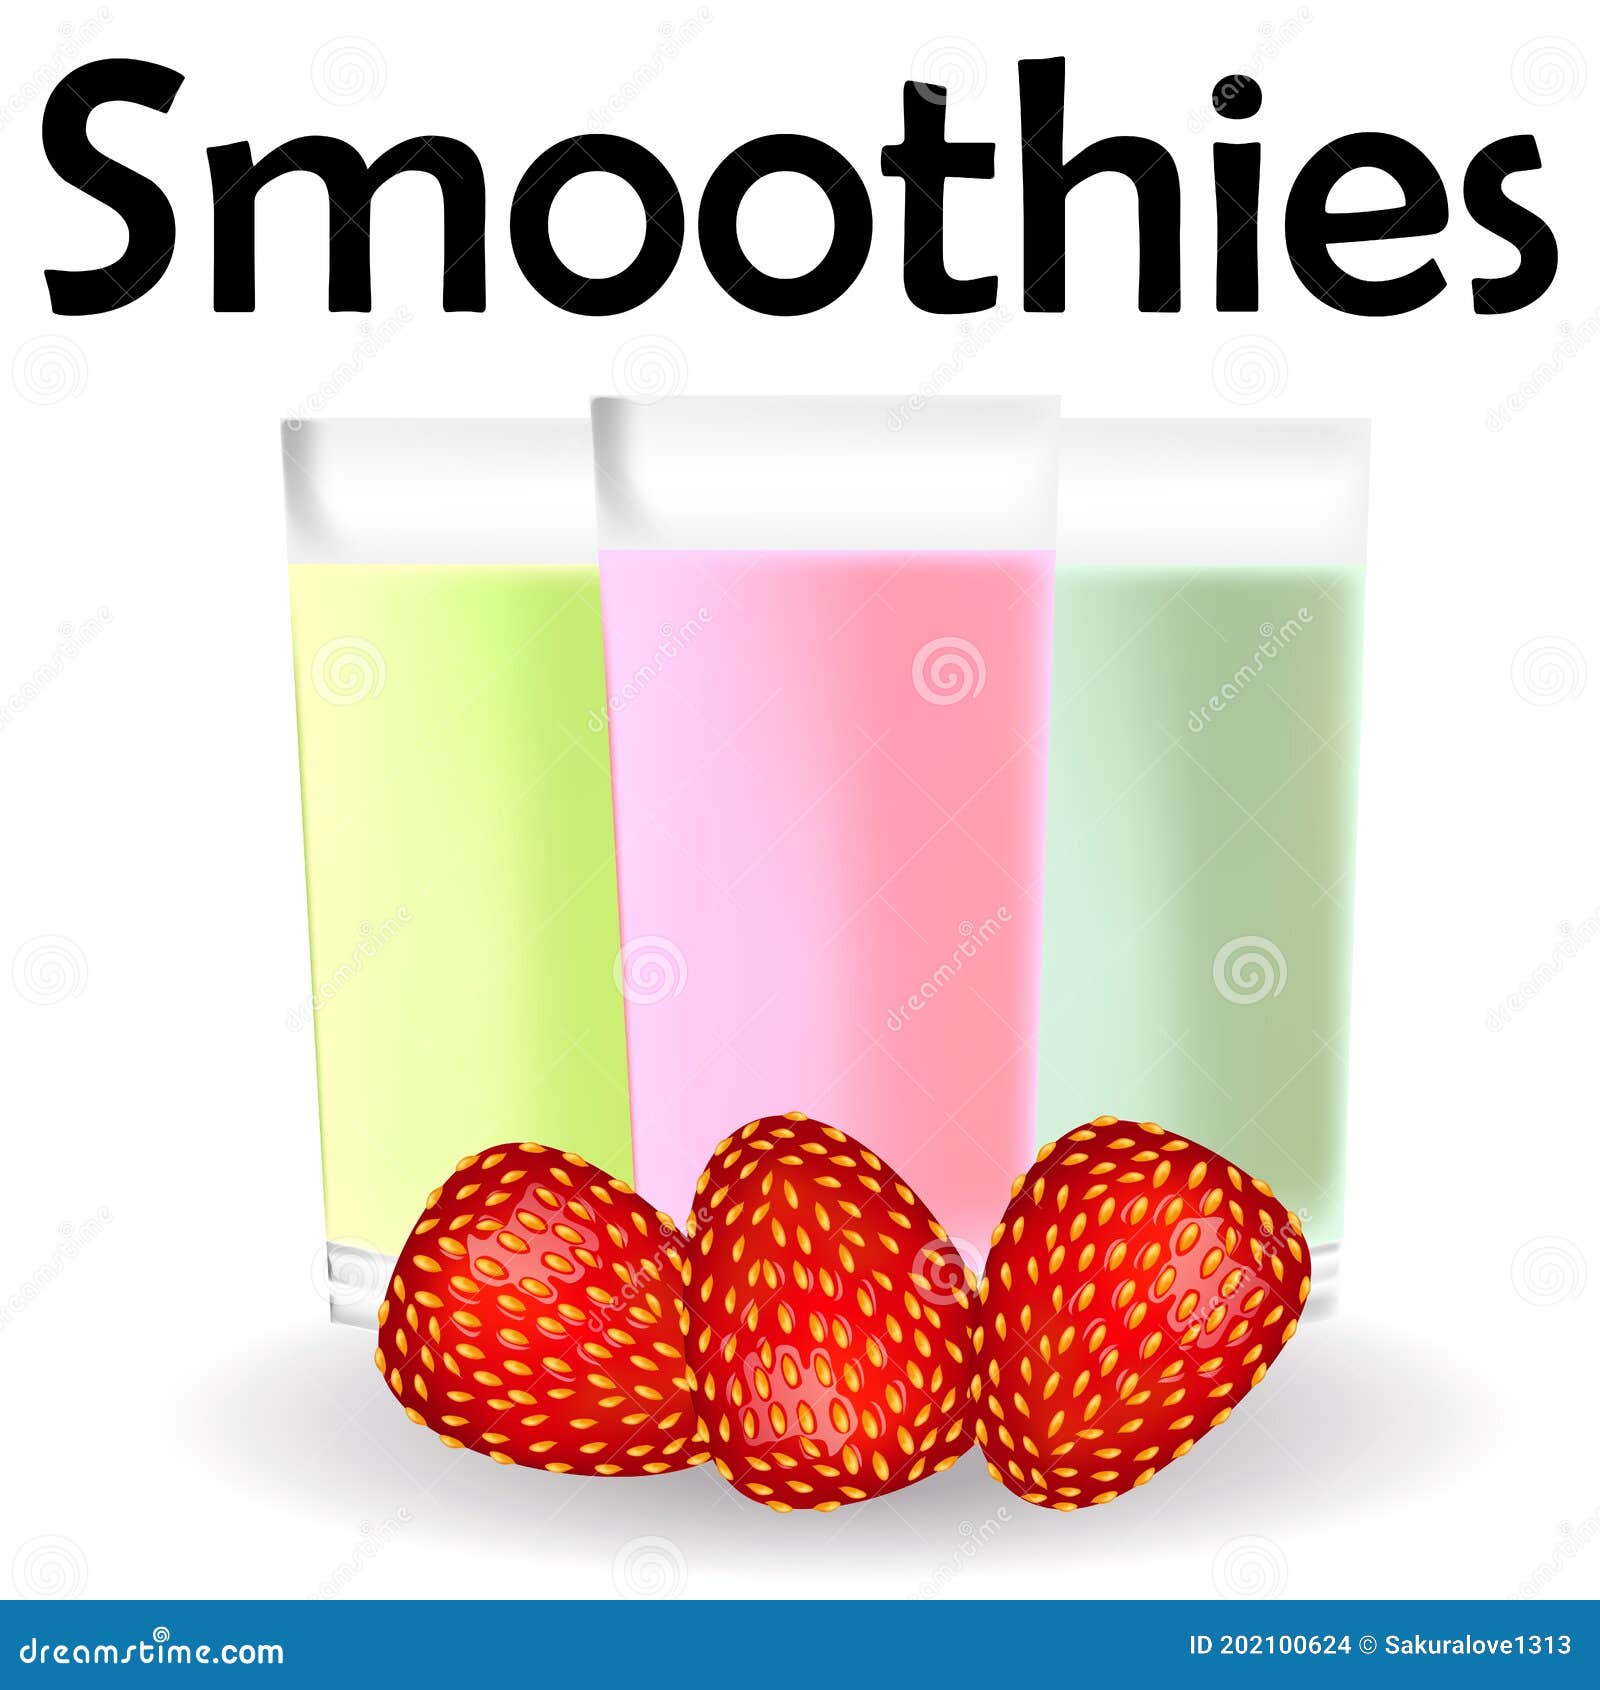 Fruit Smoothies Ads Kiwi And Berries Smoothie Cup With Fresh Fruit Isolated Stock Illustration 